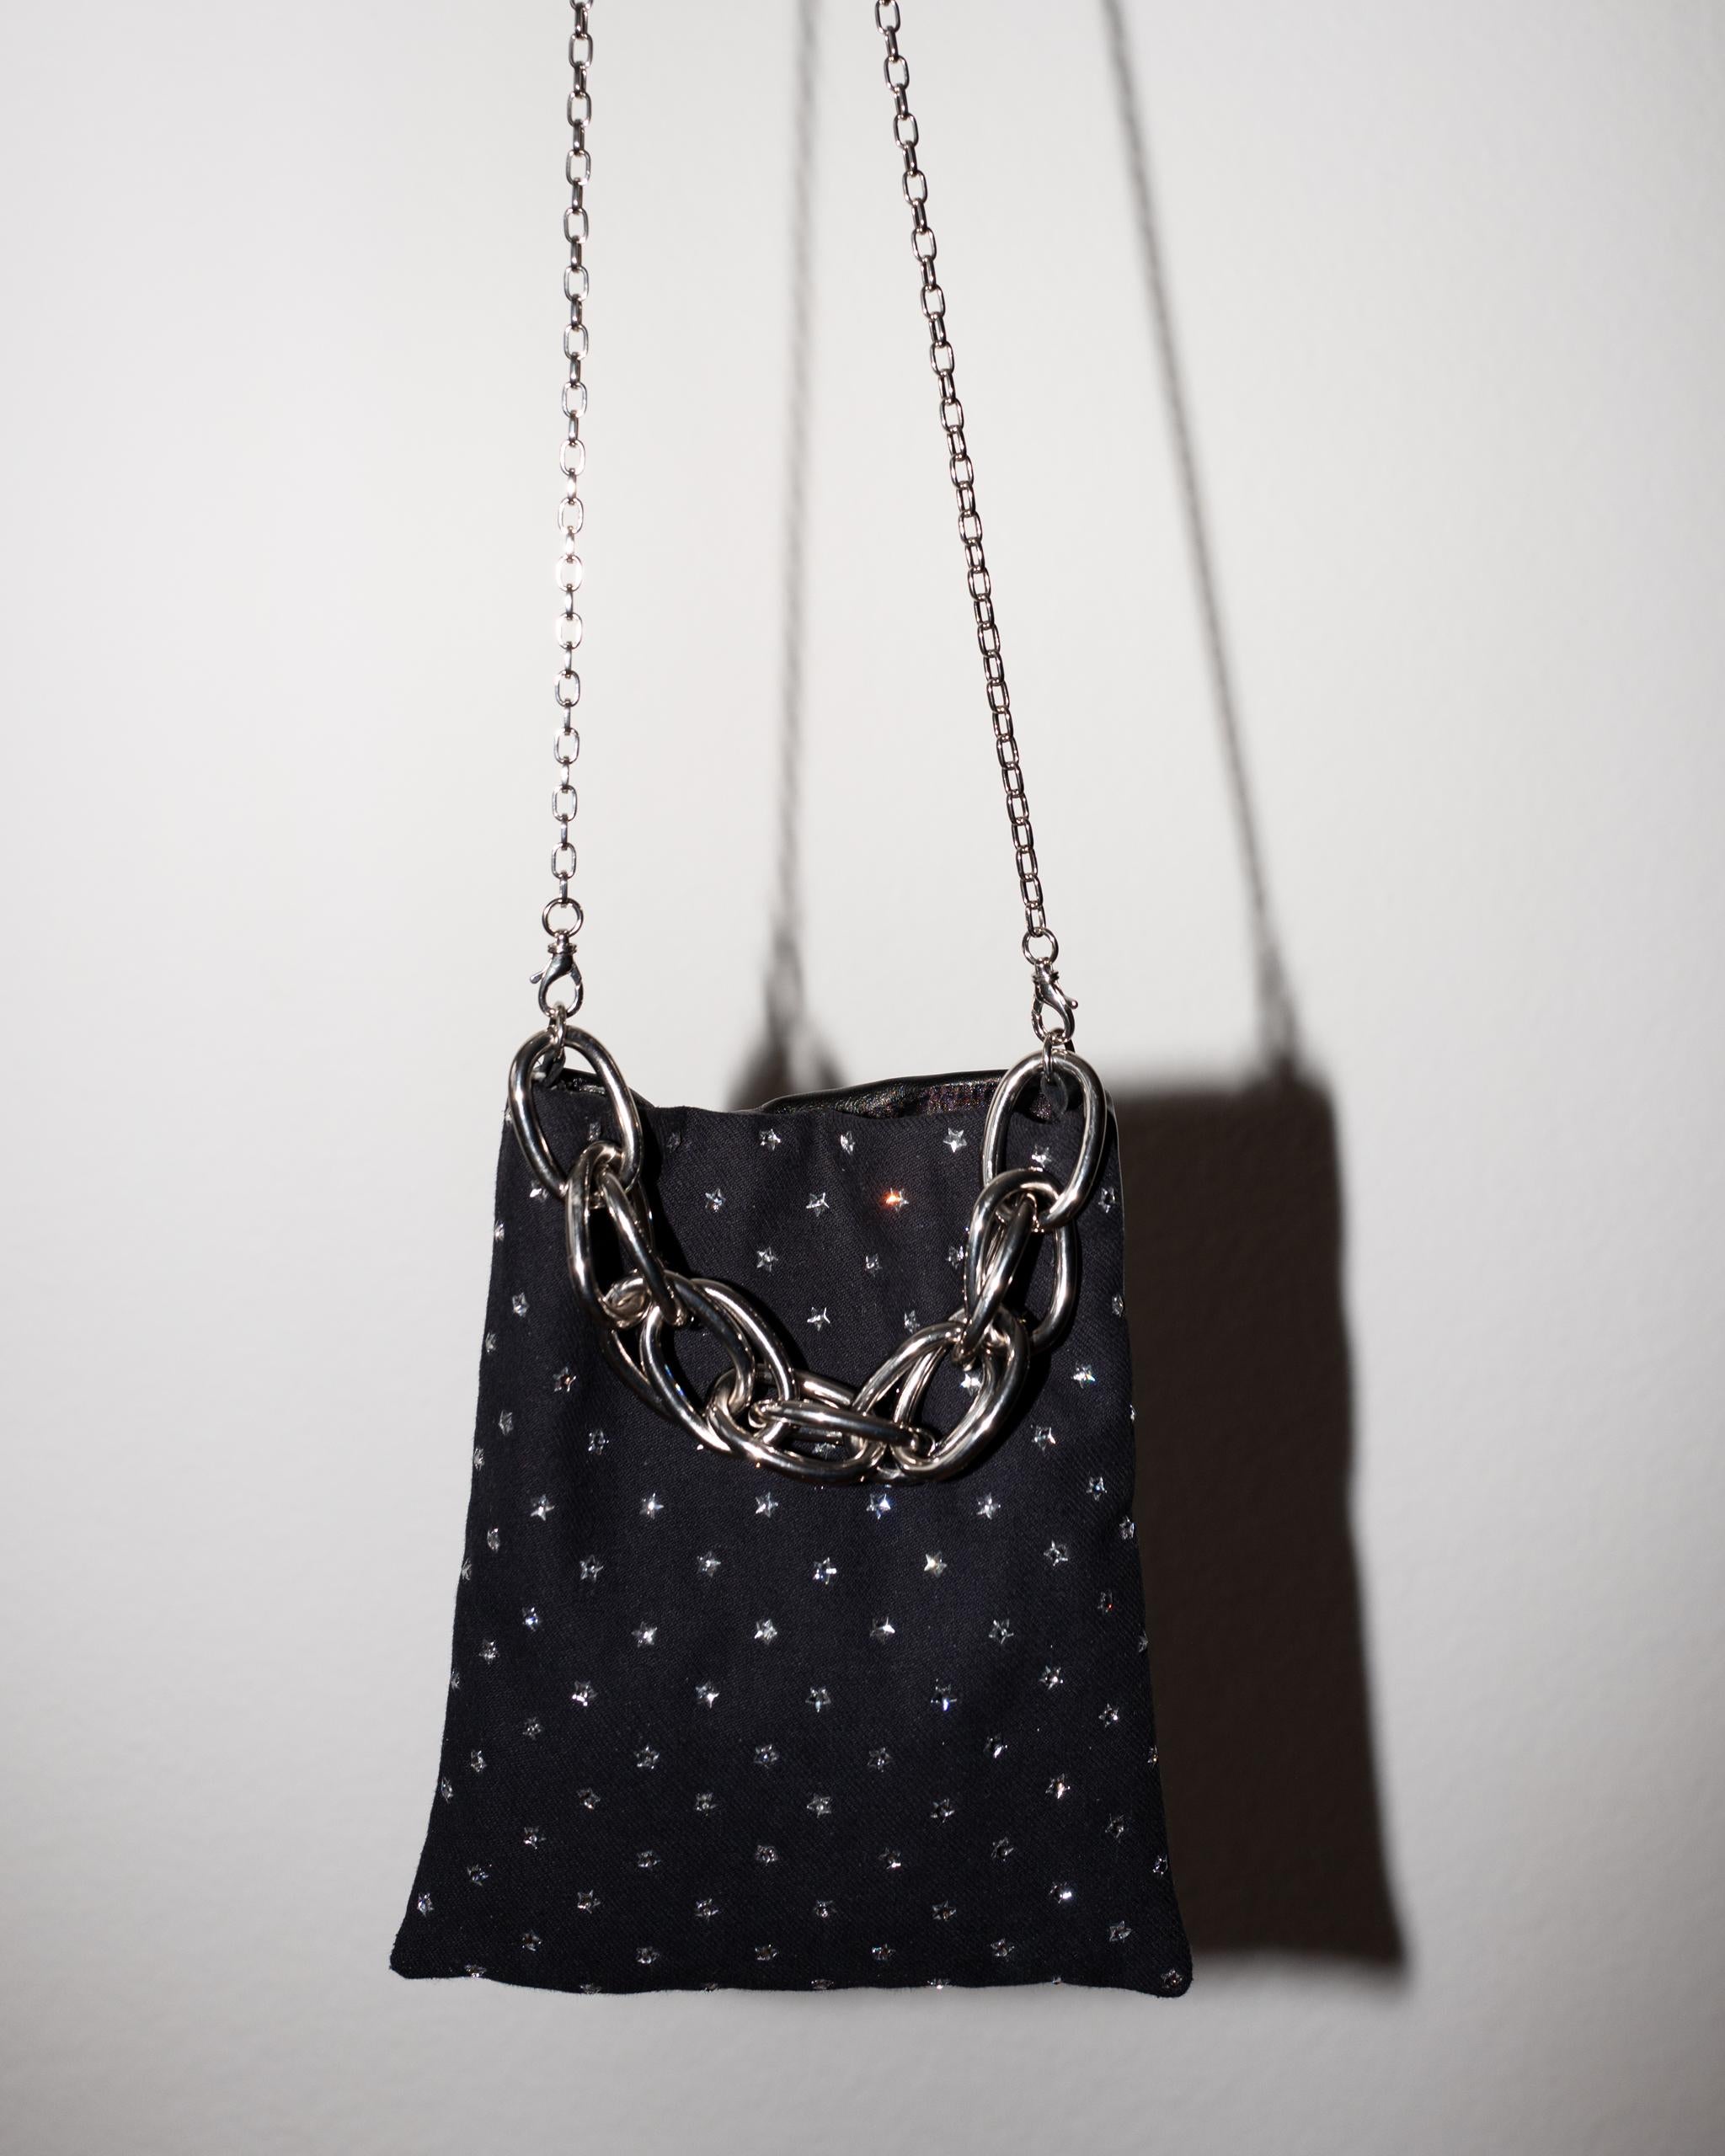 One of a kind Evening Shoulder Bag, Swarovski Silver Star Crystal Embellished  French Black Vintage Work Wear dyed Black on one side and on the other side Italian Black Napa Leather, Italian Palladium Plated Brass Shoulder Chain, Detachable  and